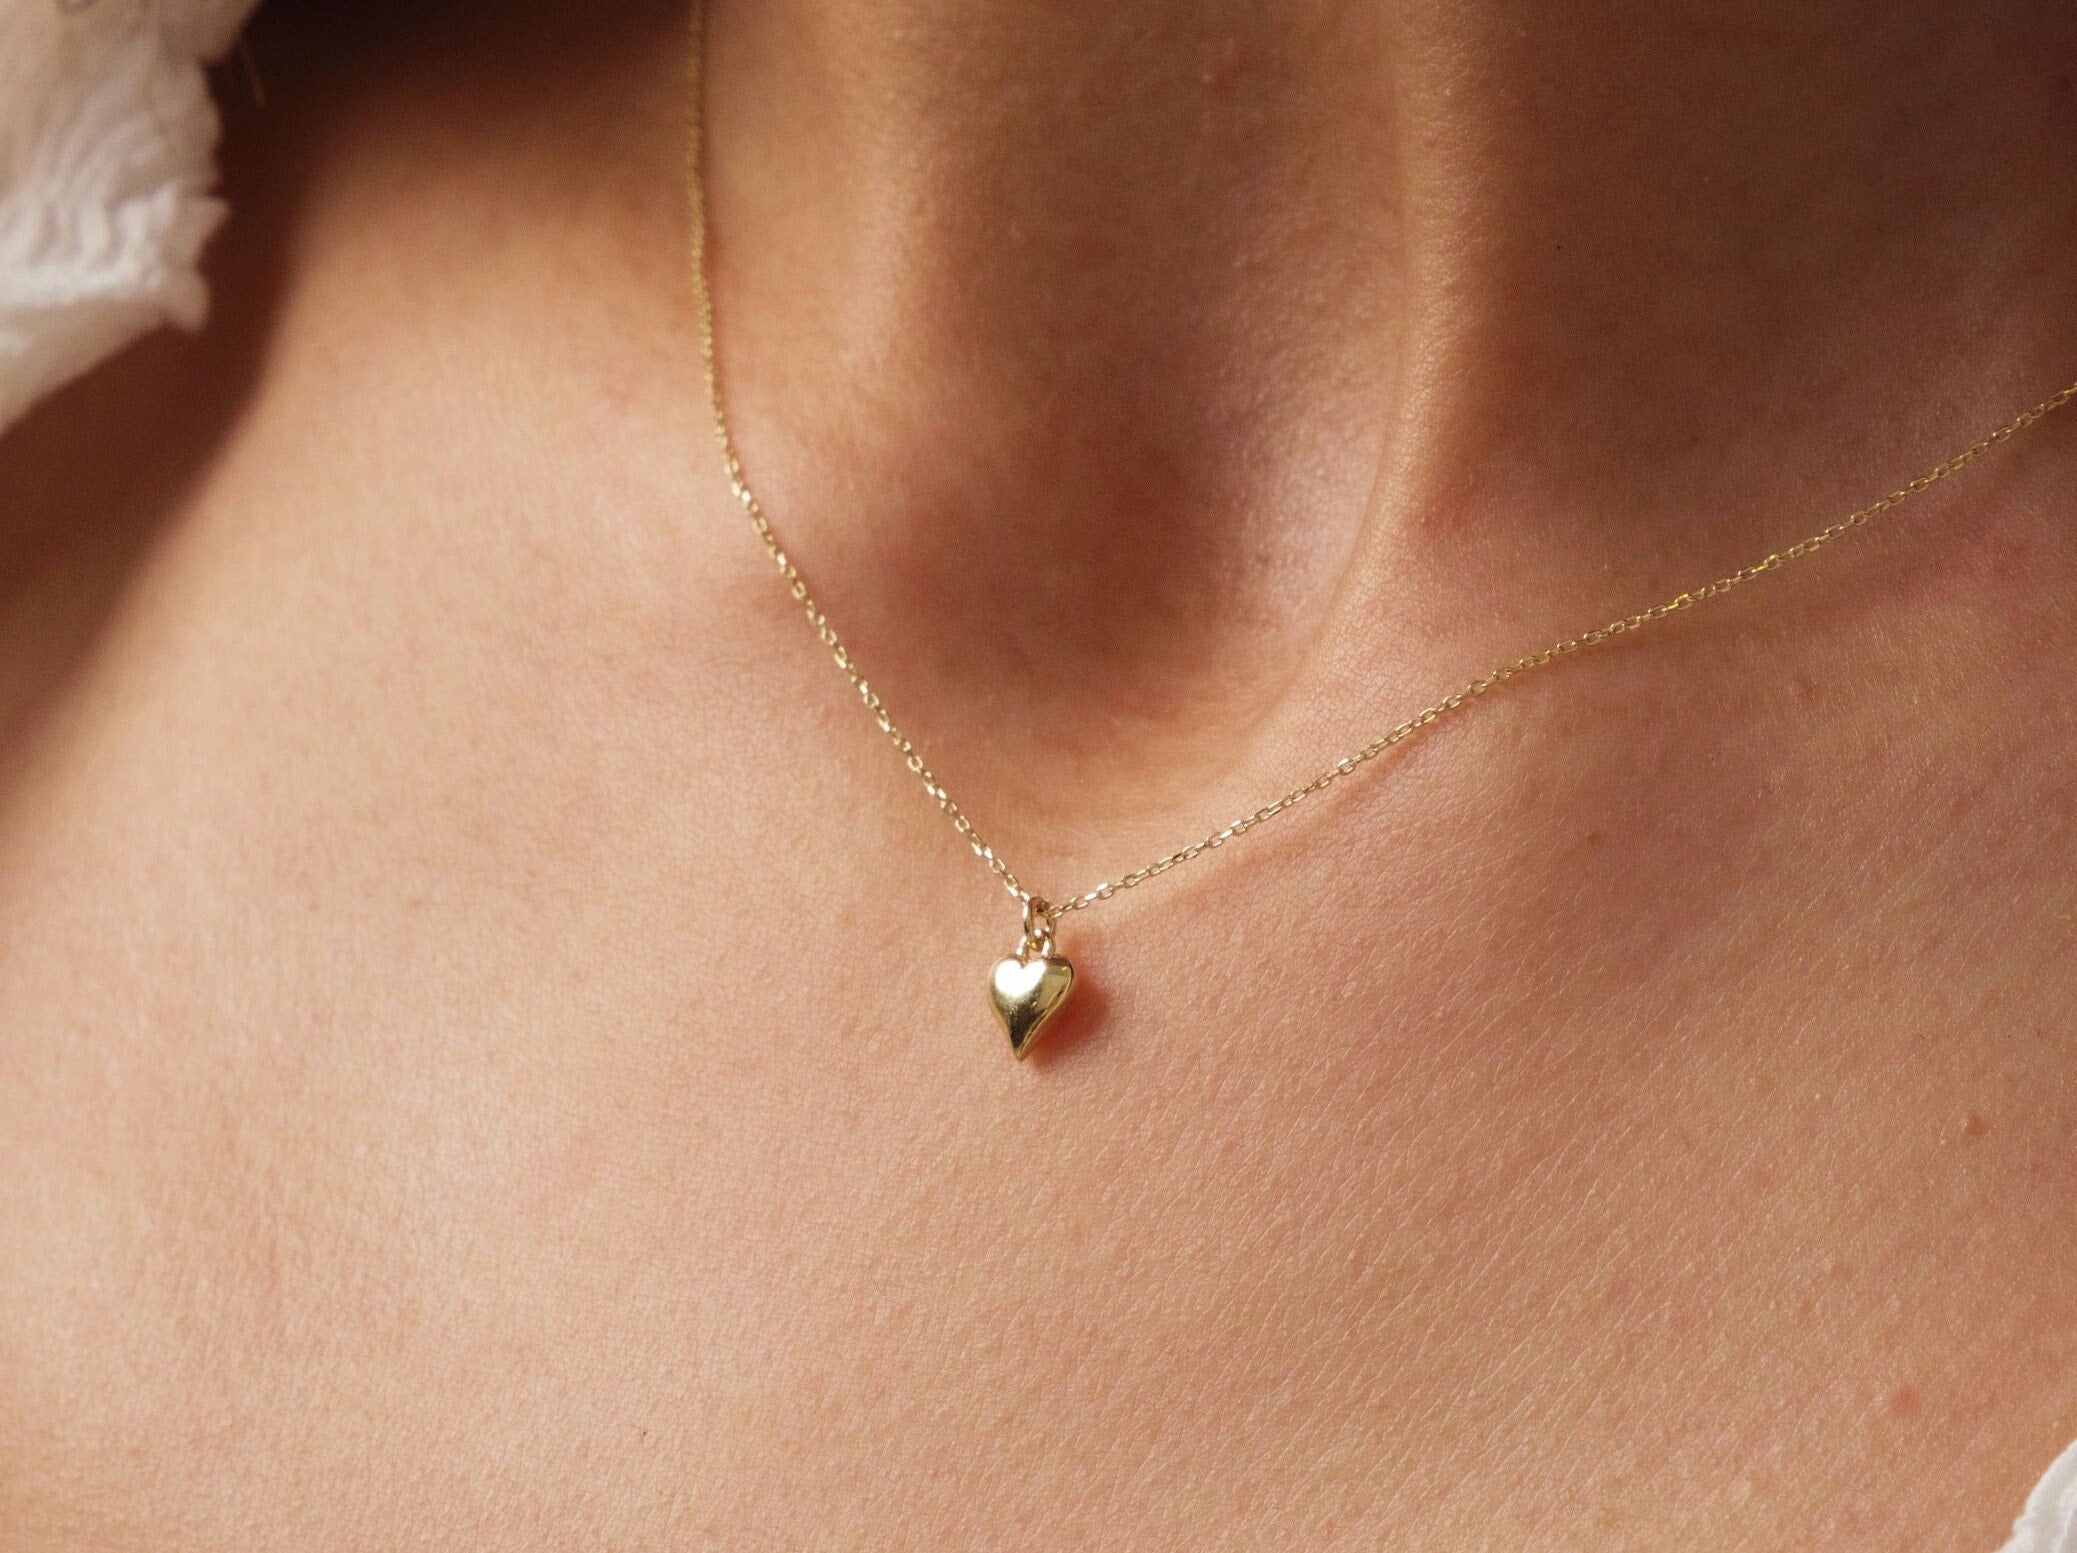 14K Gold Heart Necklace, Puffy Heart Necklace, Mini 3D Heart Pendant, Small Heart Real Gold Charm, Love Pendant Necklace, Gift for Her